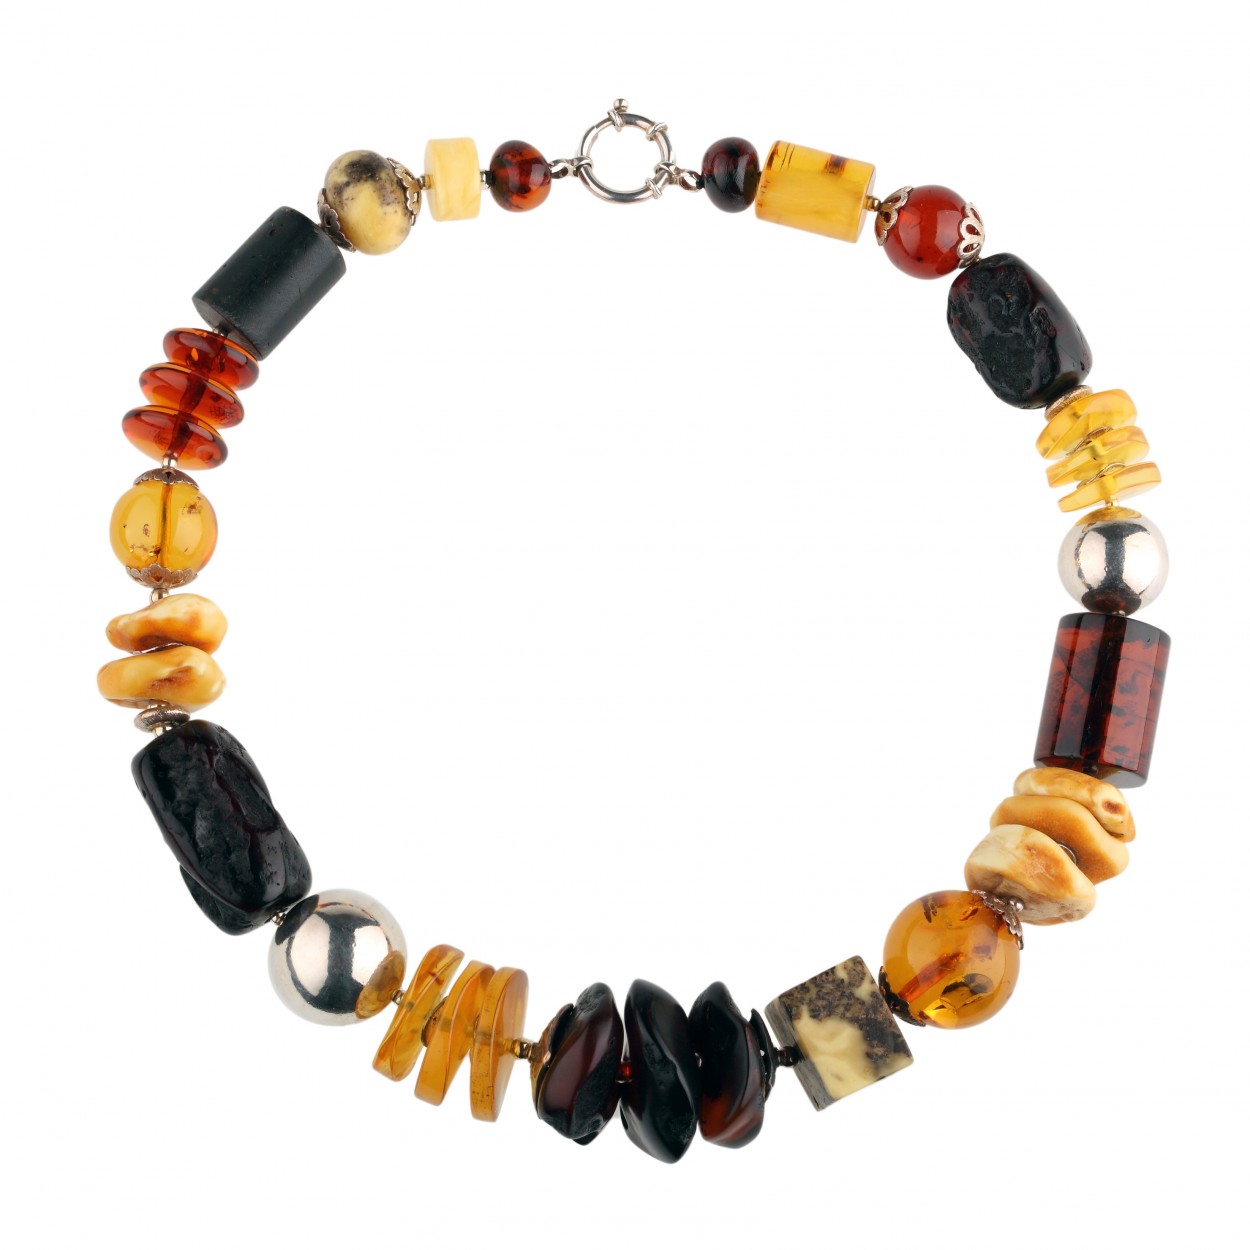 Necklace in Amber Resin and Indian Amber - IB03622